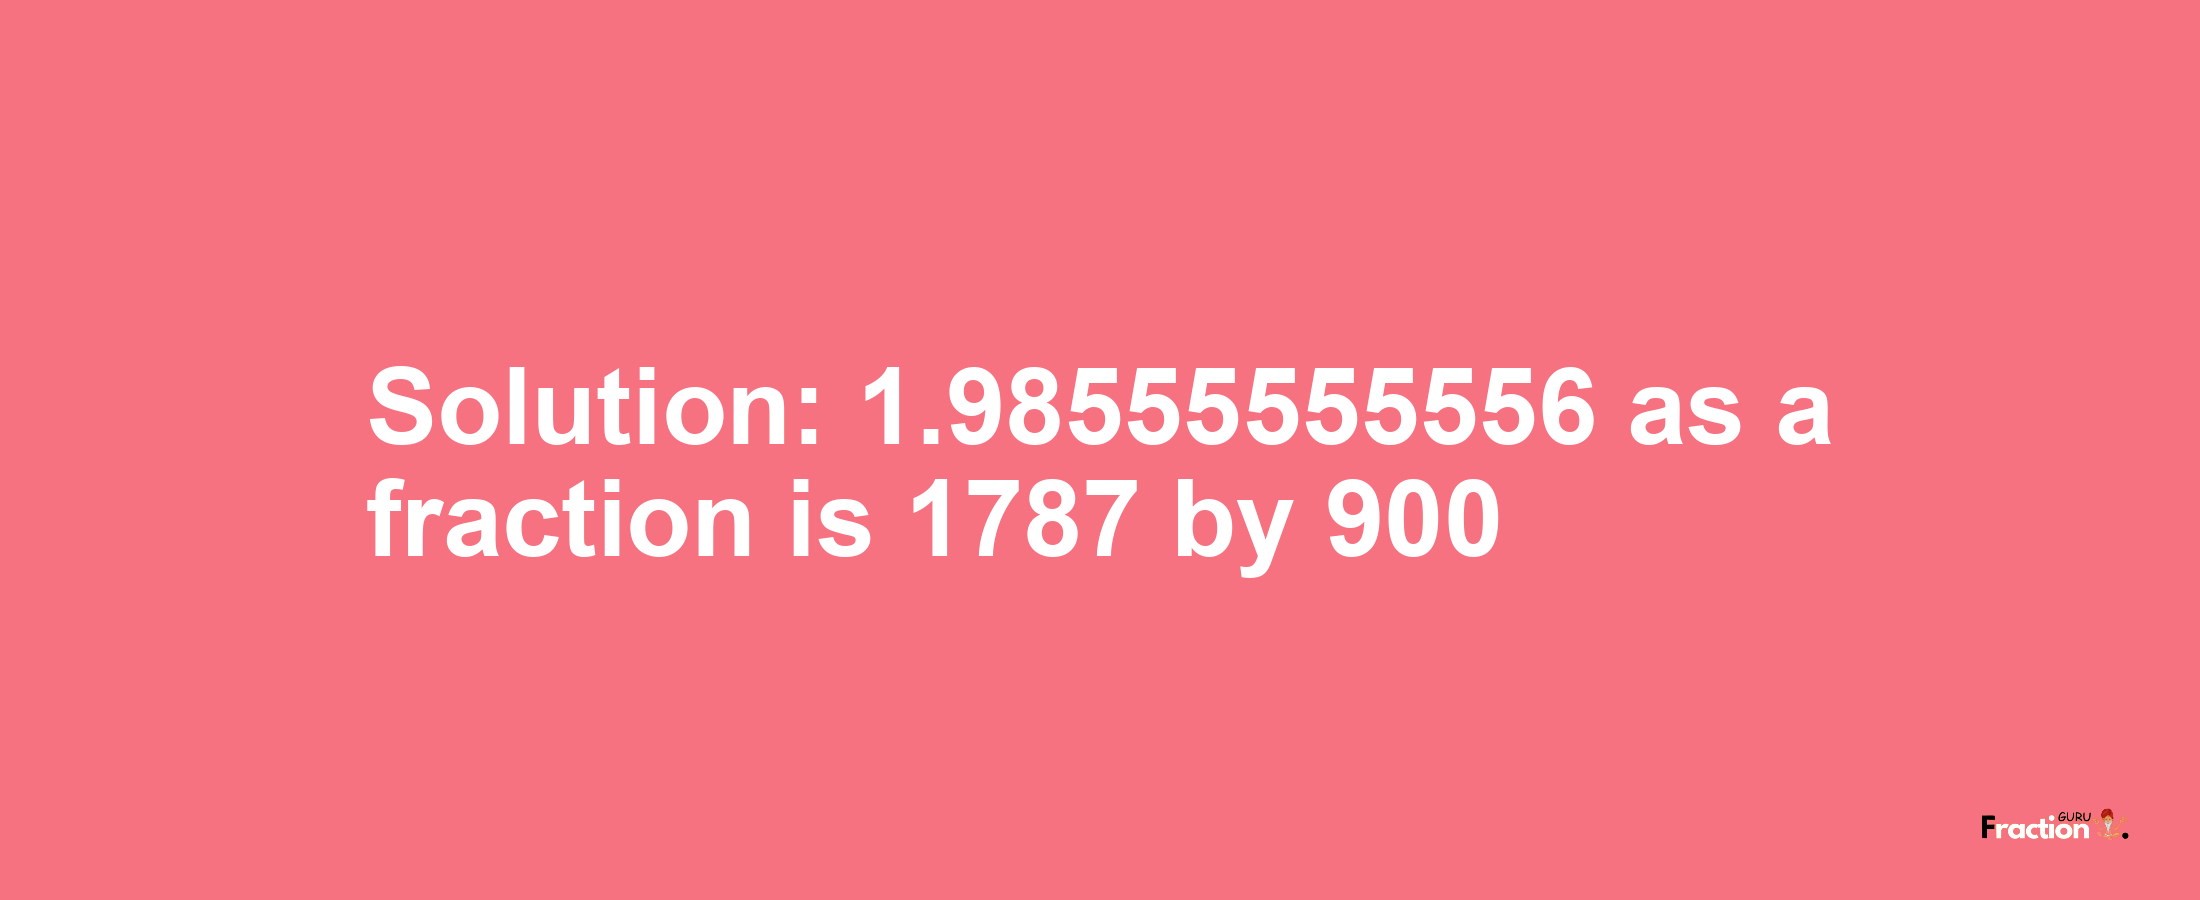 Solution:1.98555555556 as a fraction is 1787/900